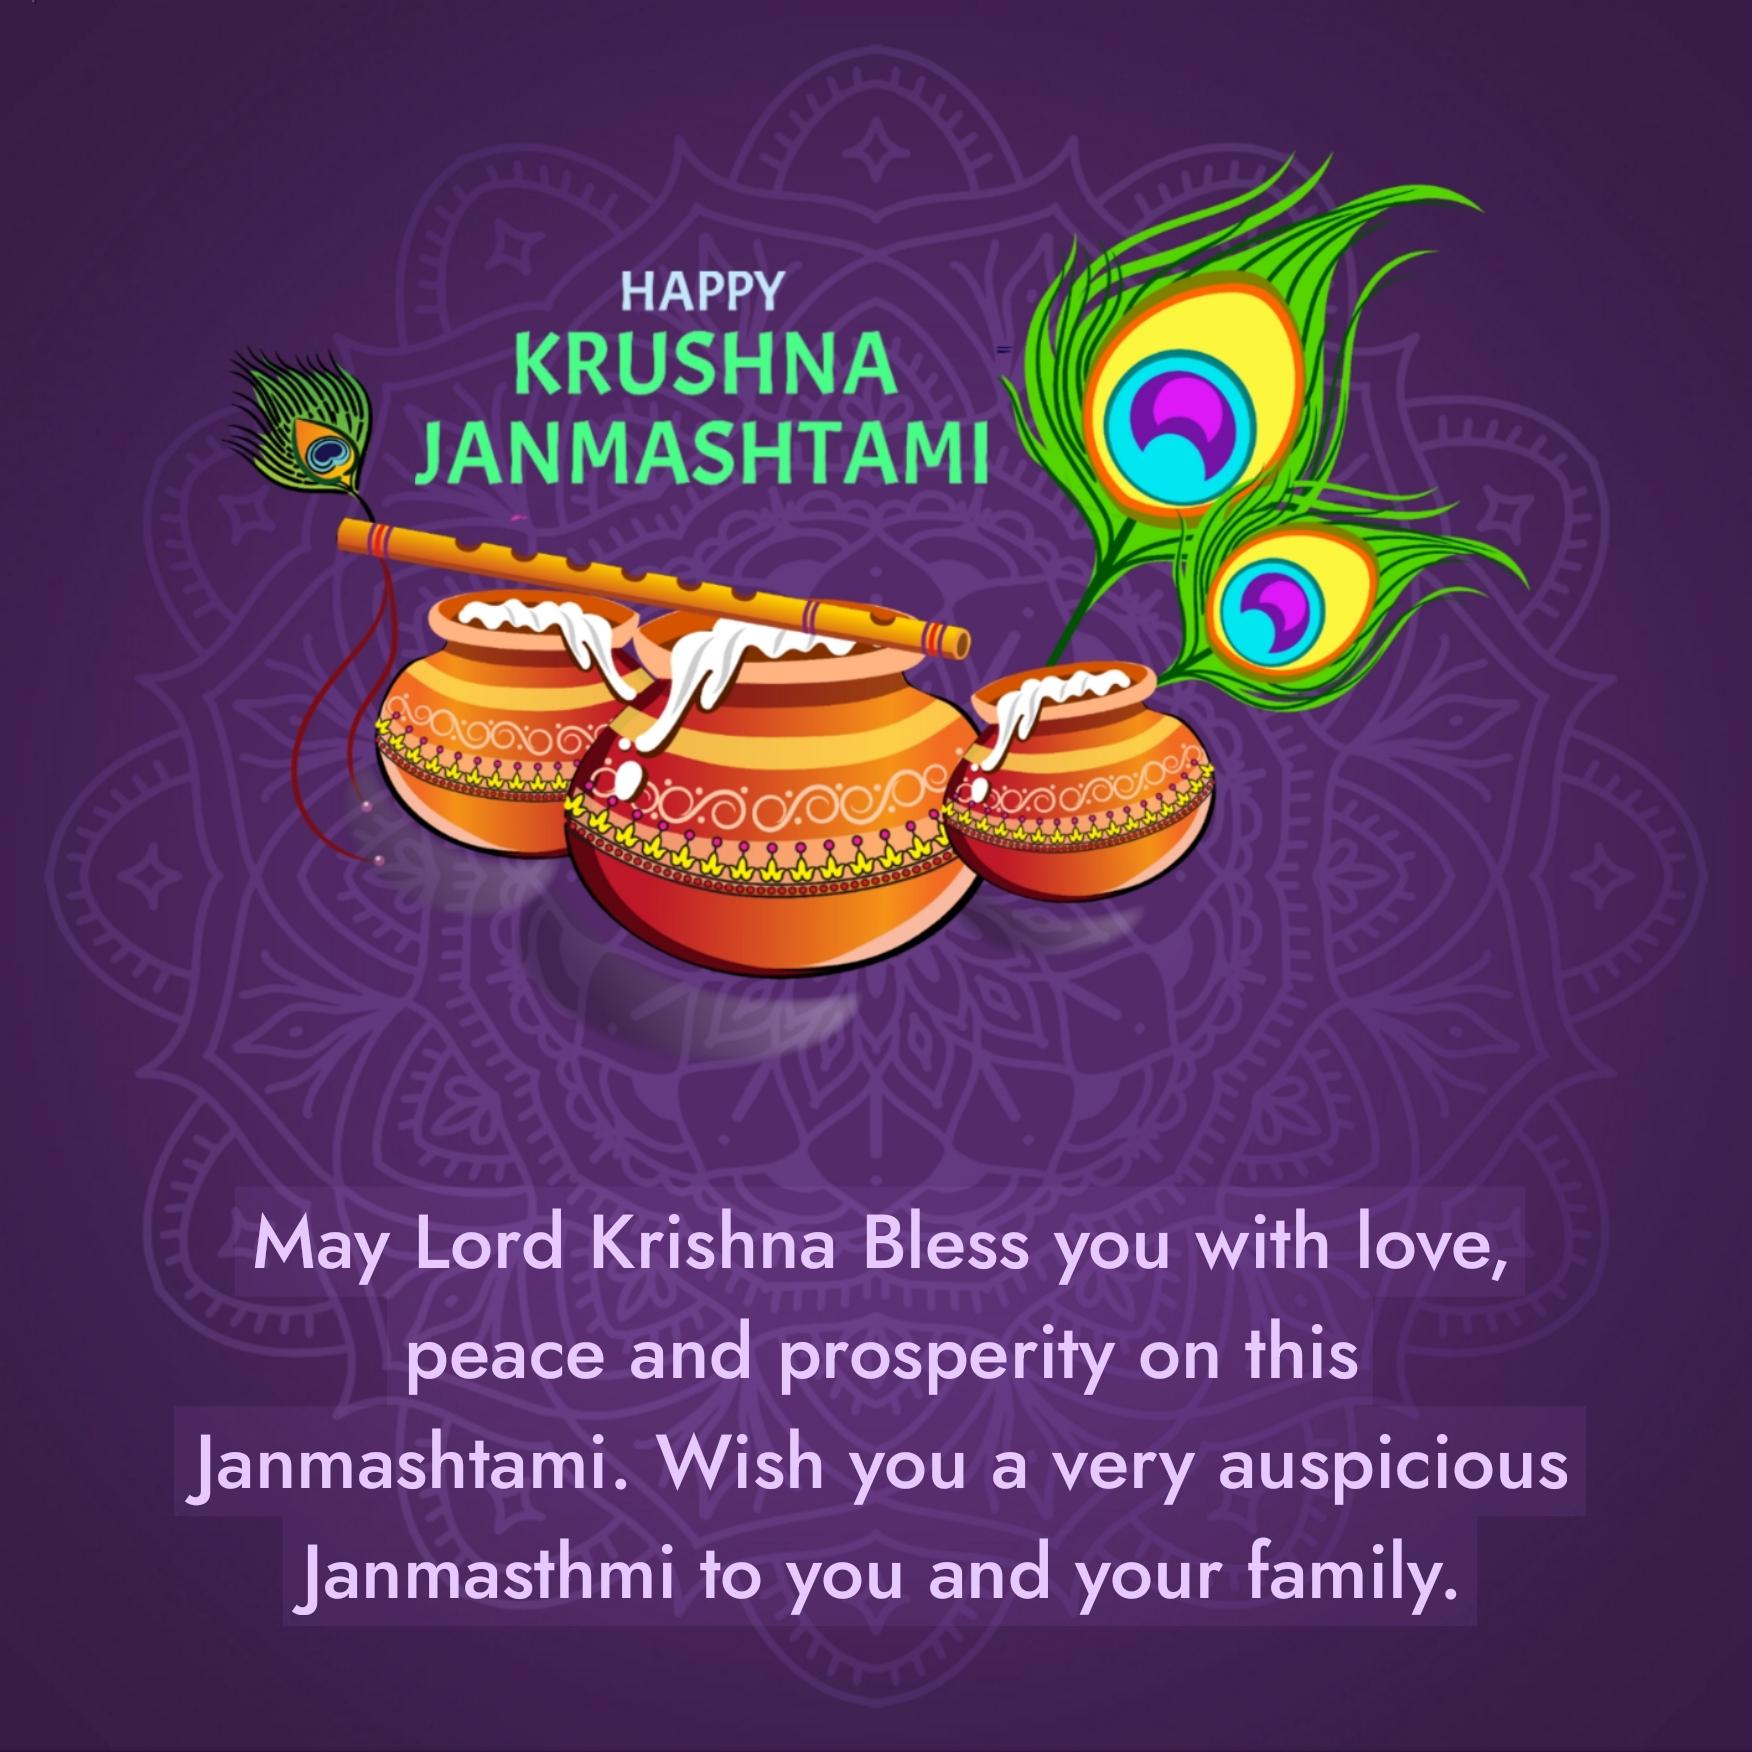 May Lord Krishna Bless you with love peace and prosperity